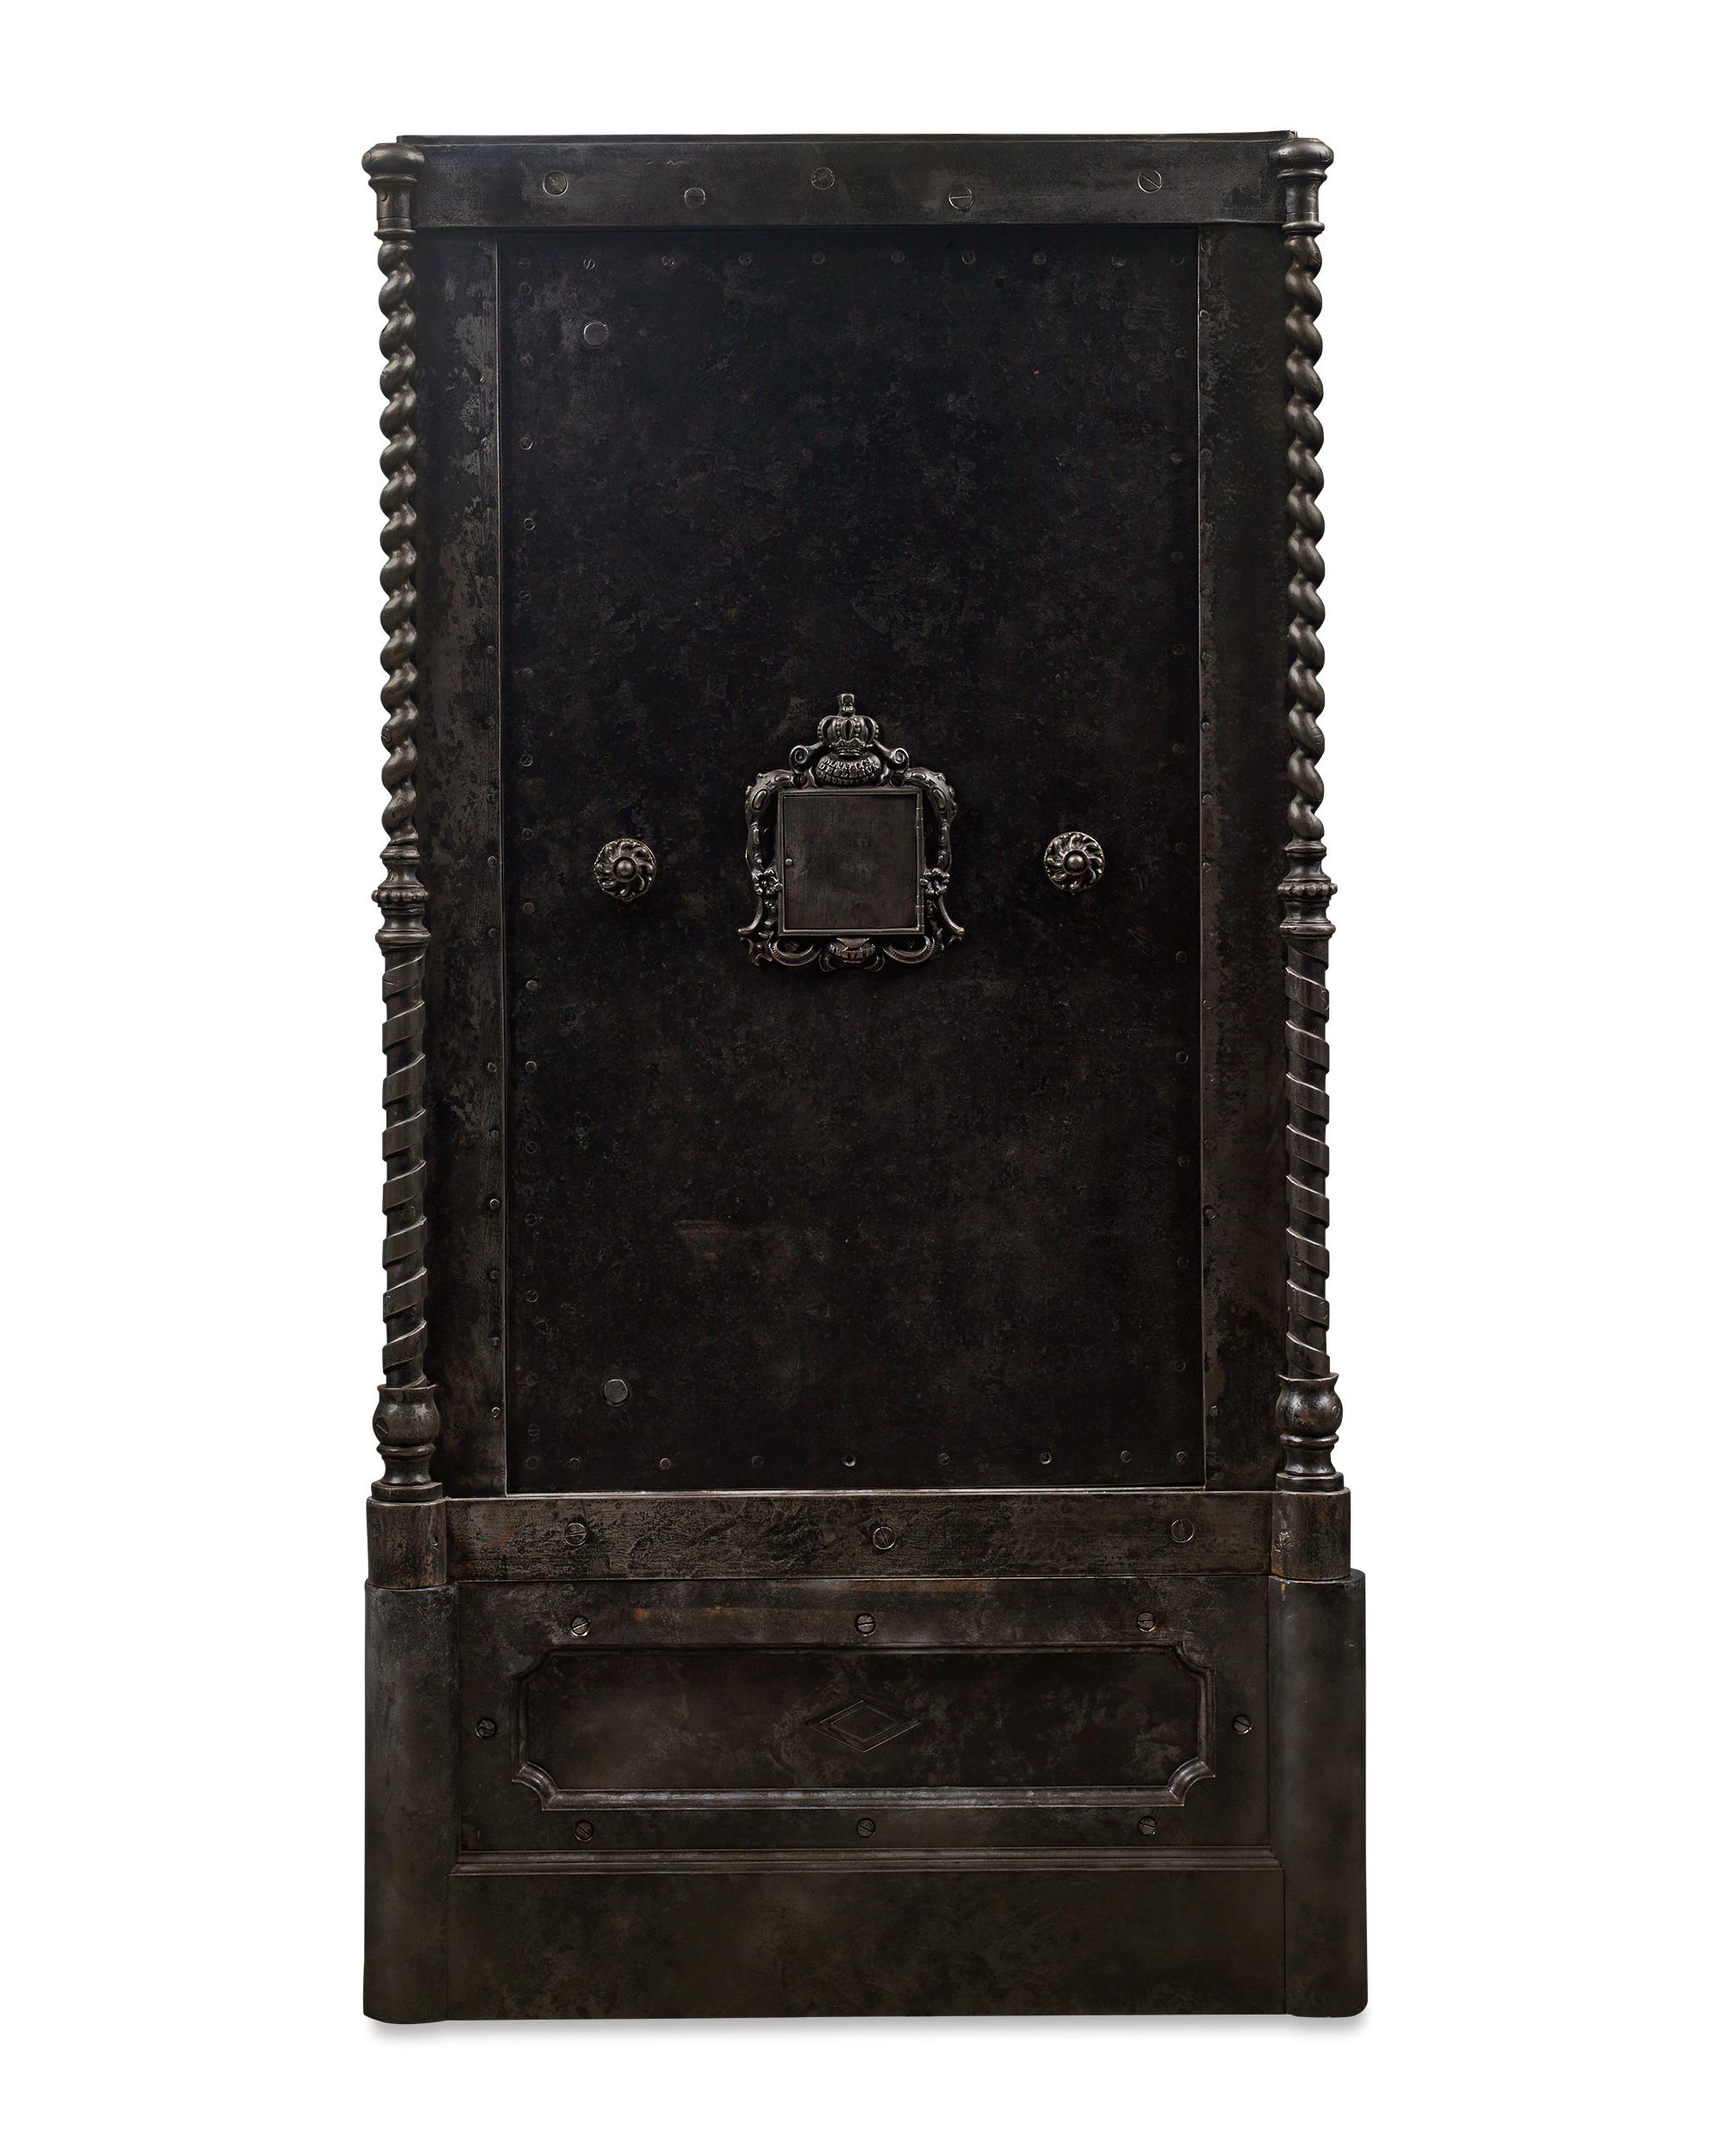 This Belgian cast-iron safe represents an important precursor to the modern combination lock. The 19th-century safe features a state-of-the-art hidden lock mechanism that is additionally secured by a four-letter combination code. A hidden key opens